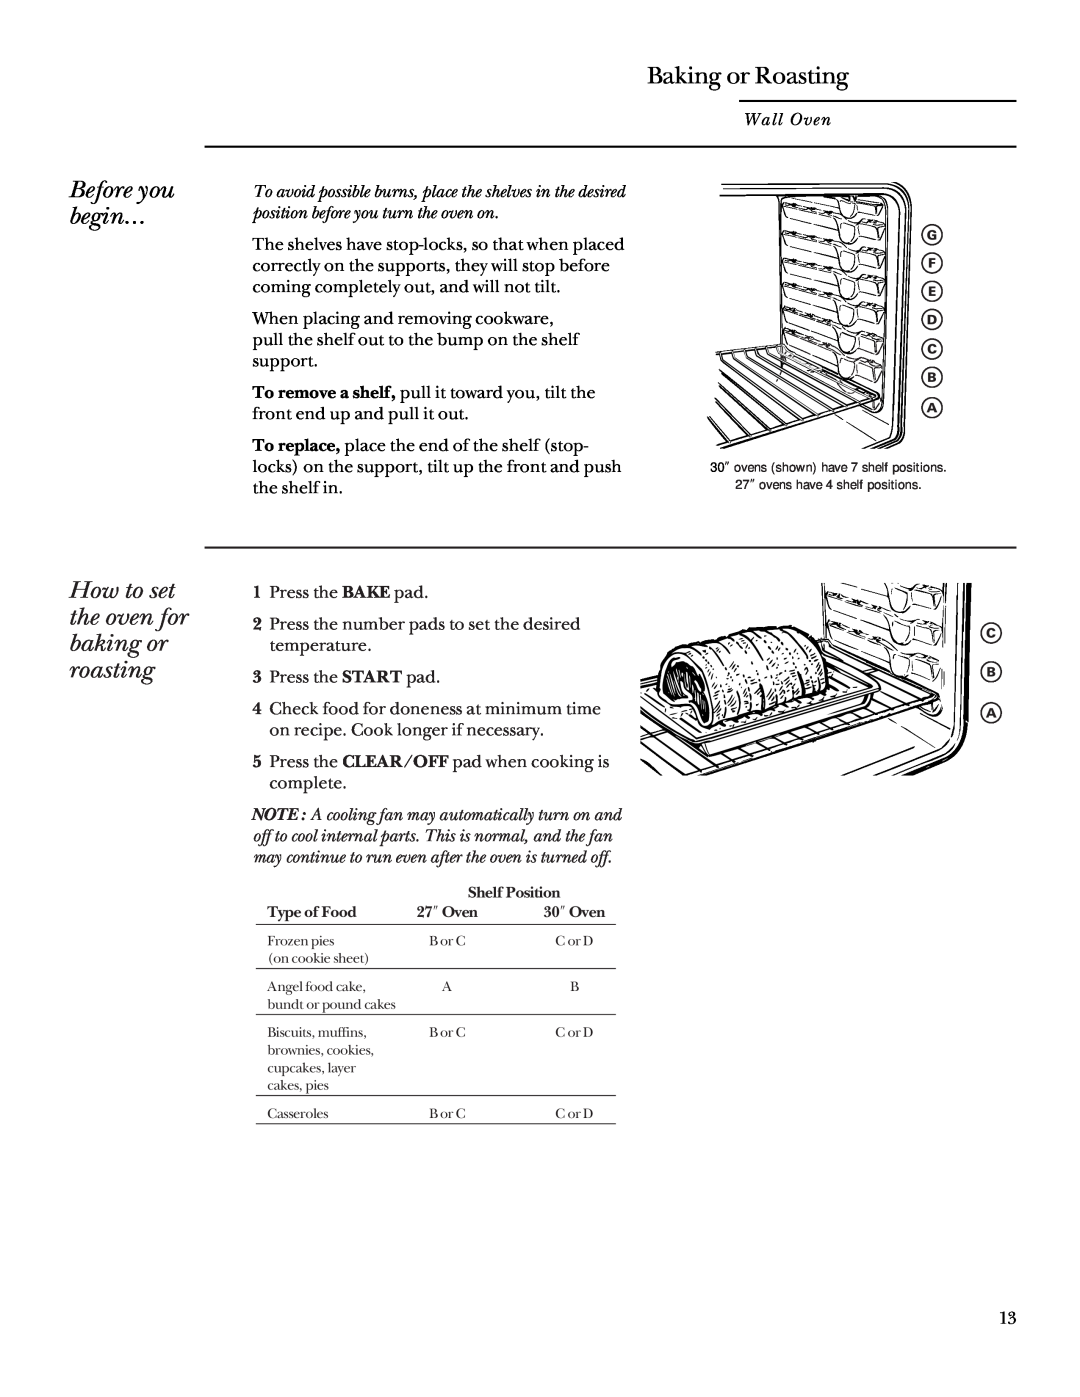 GE 164D3333P095 manual Baking or Roasting, Before you begin…, How to set the oven for baking or roasting 